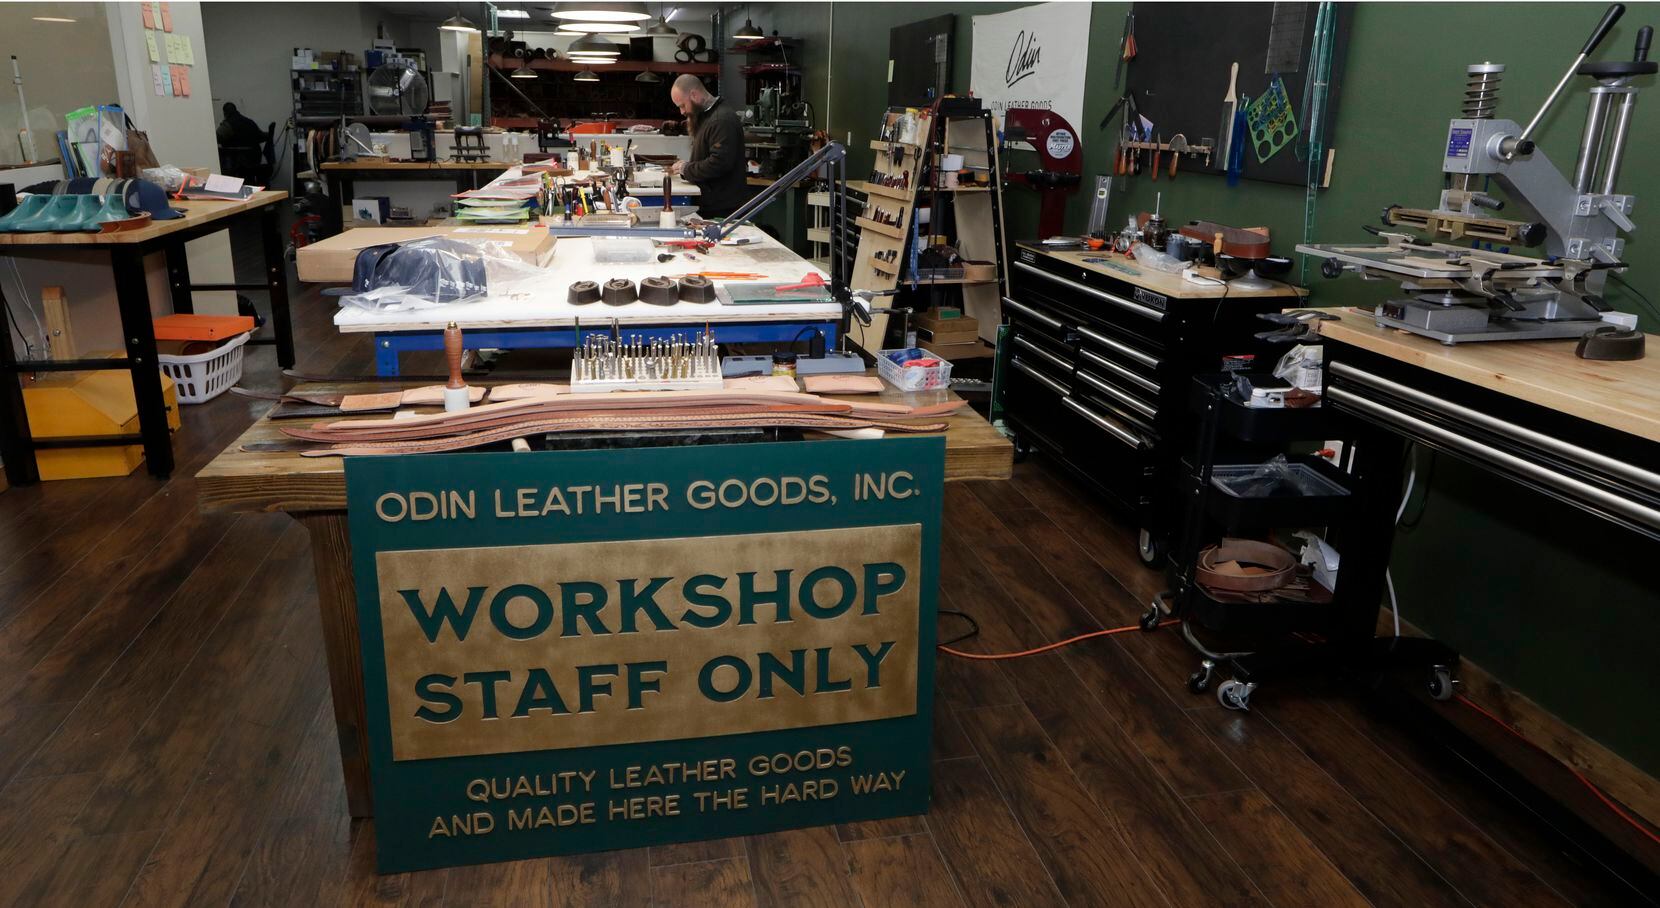 Odin Leather Goods' workshop is in downtown Lewisville.